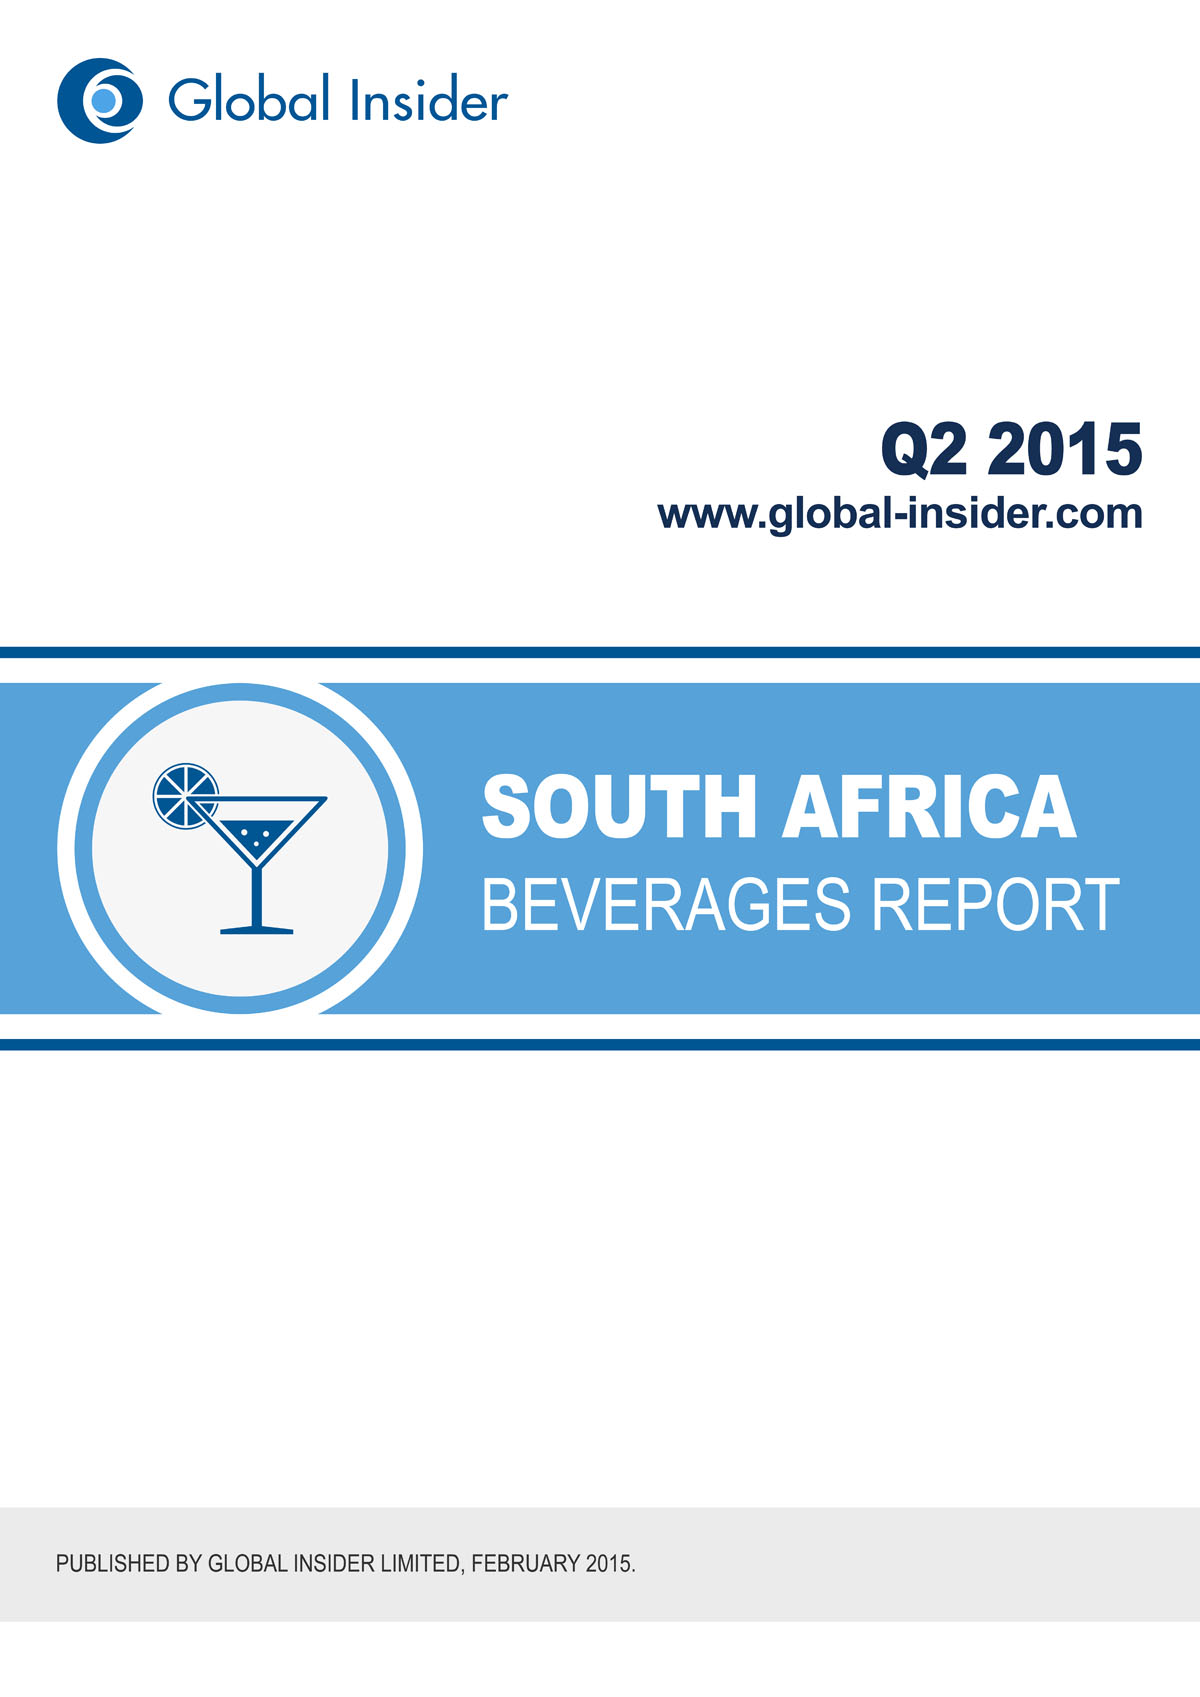 South Africa Beverages Report